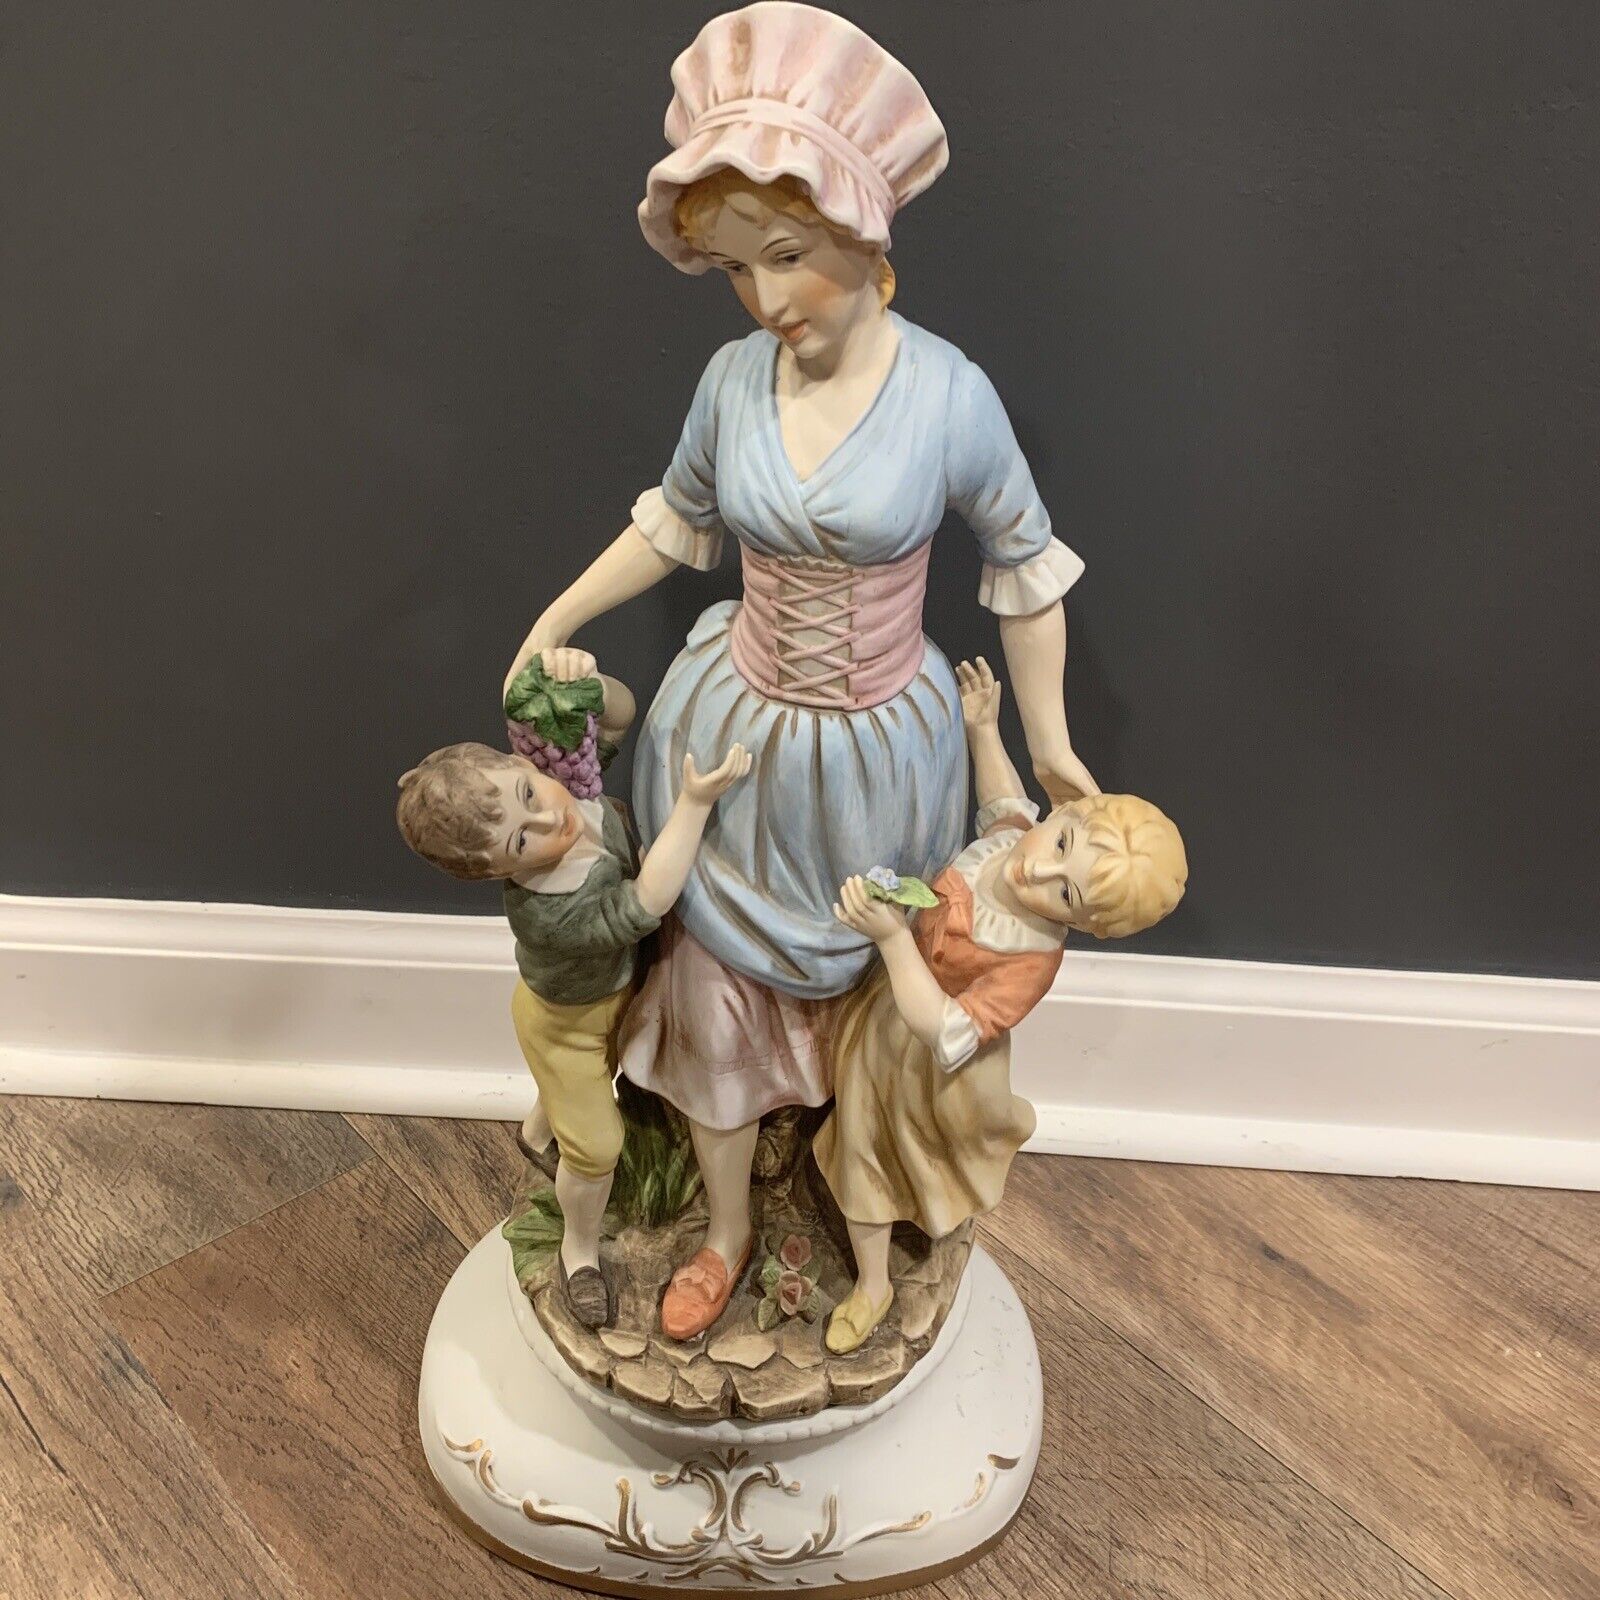 Lenwile Ardalt Hand Painted Figurine of Woman with Two Children On Pedestal RARE